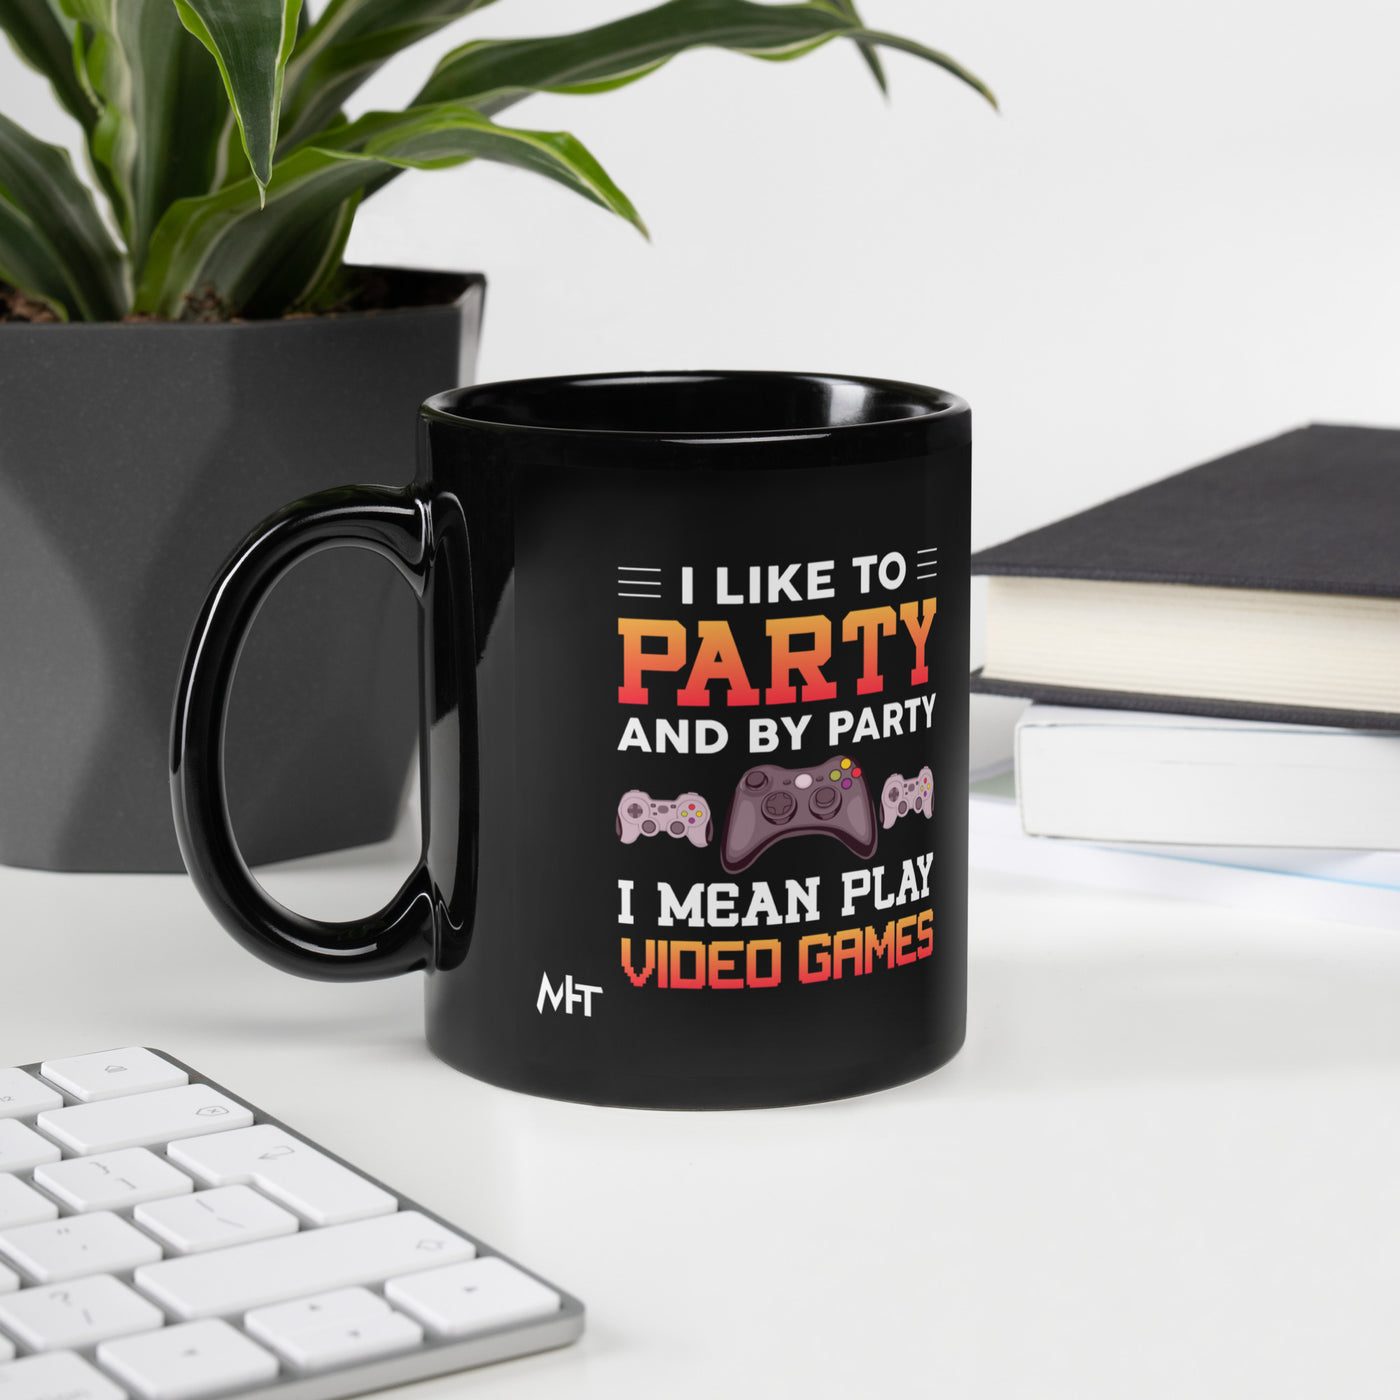 I Like to Party and by Party, I mean Play Video Games - Black Glossy Mug